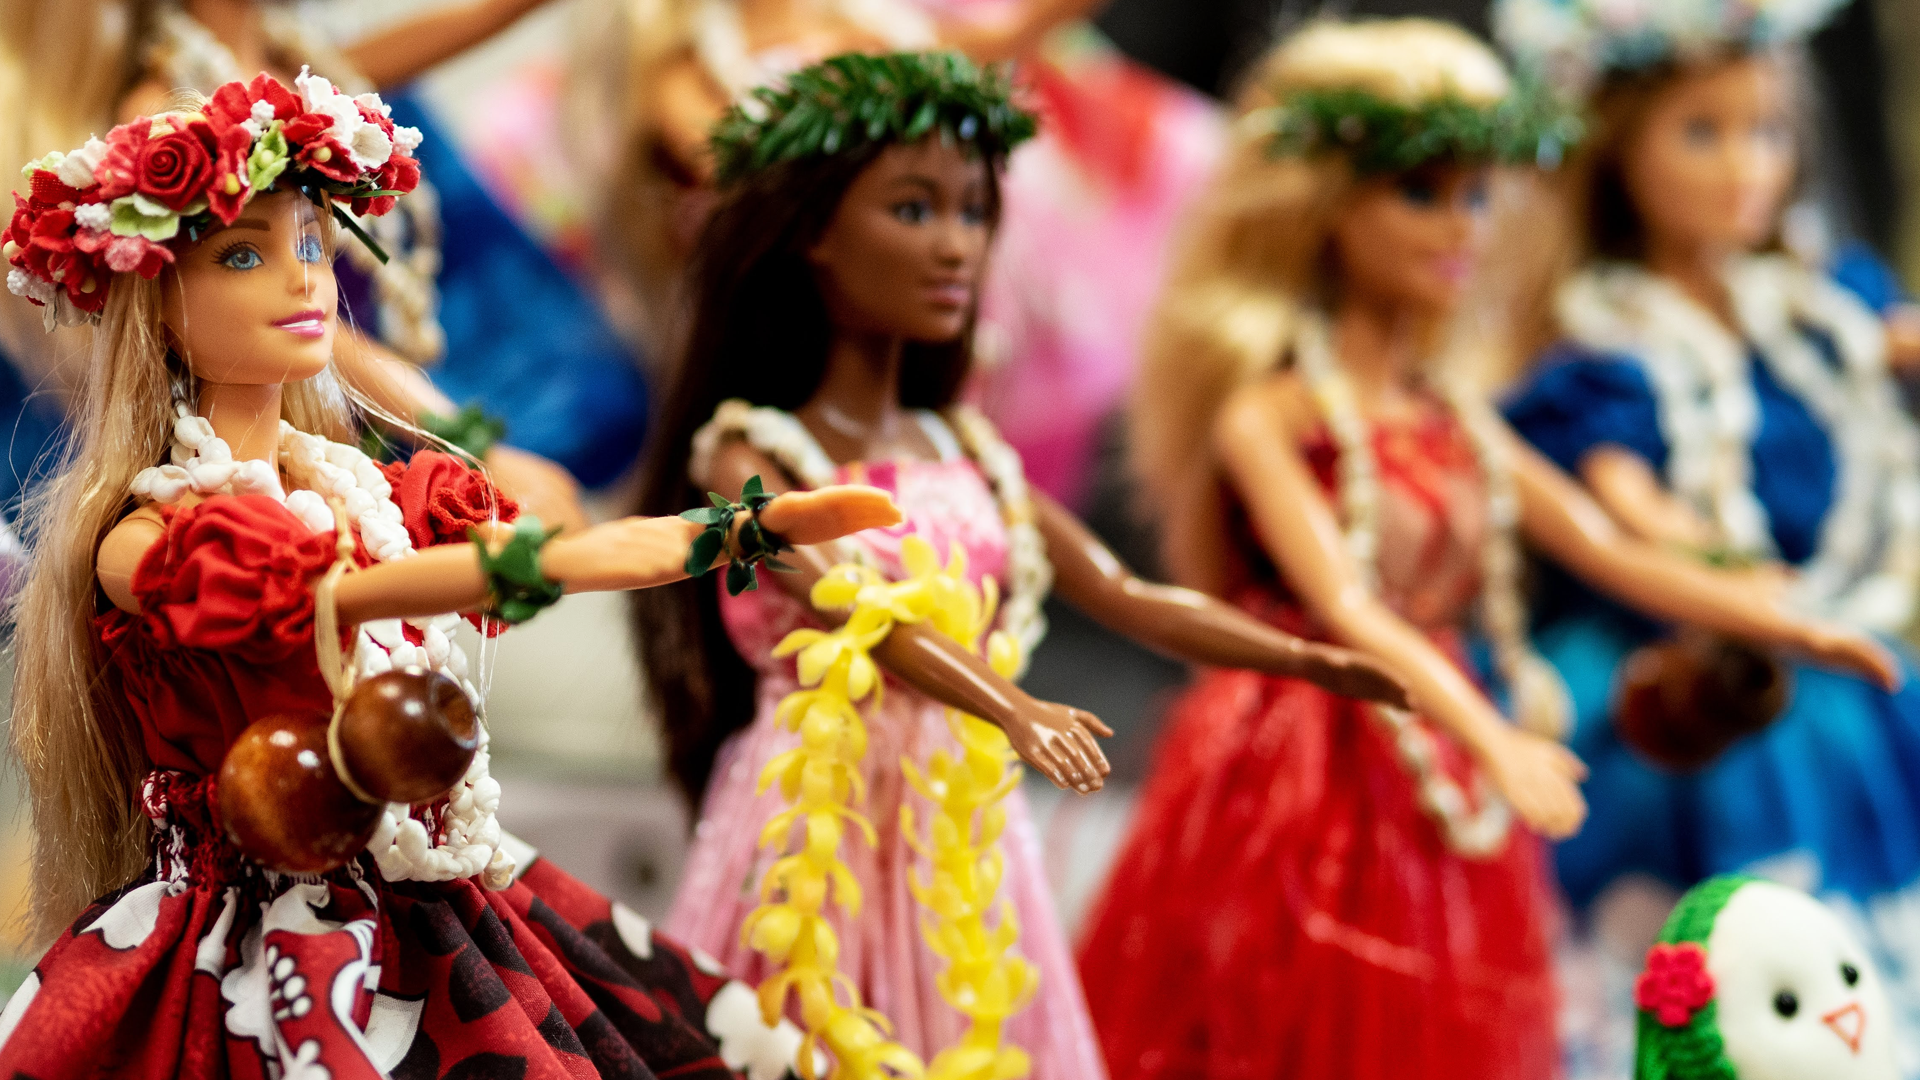 Barbie’s latest attempt at inclusivity has mixed reviews